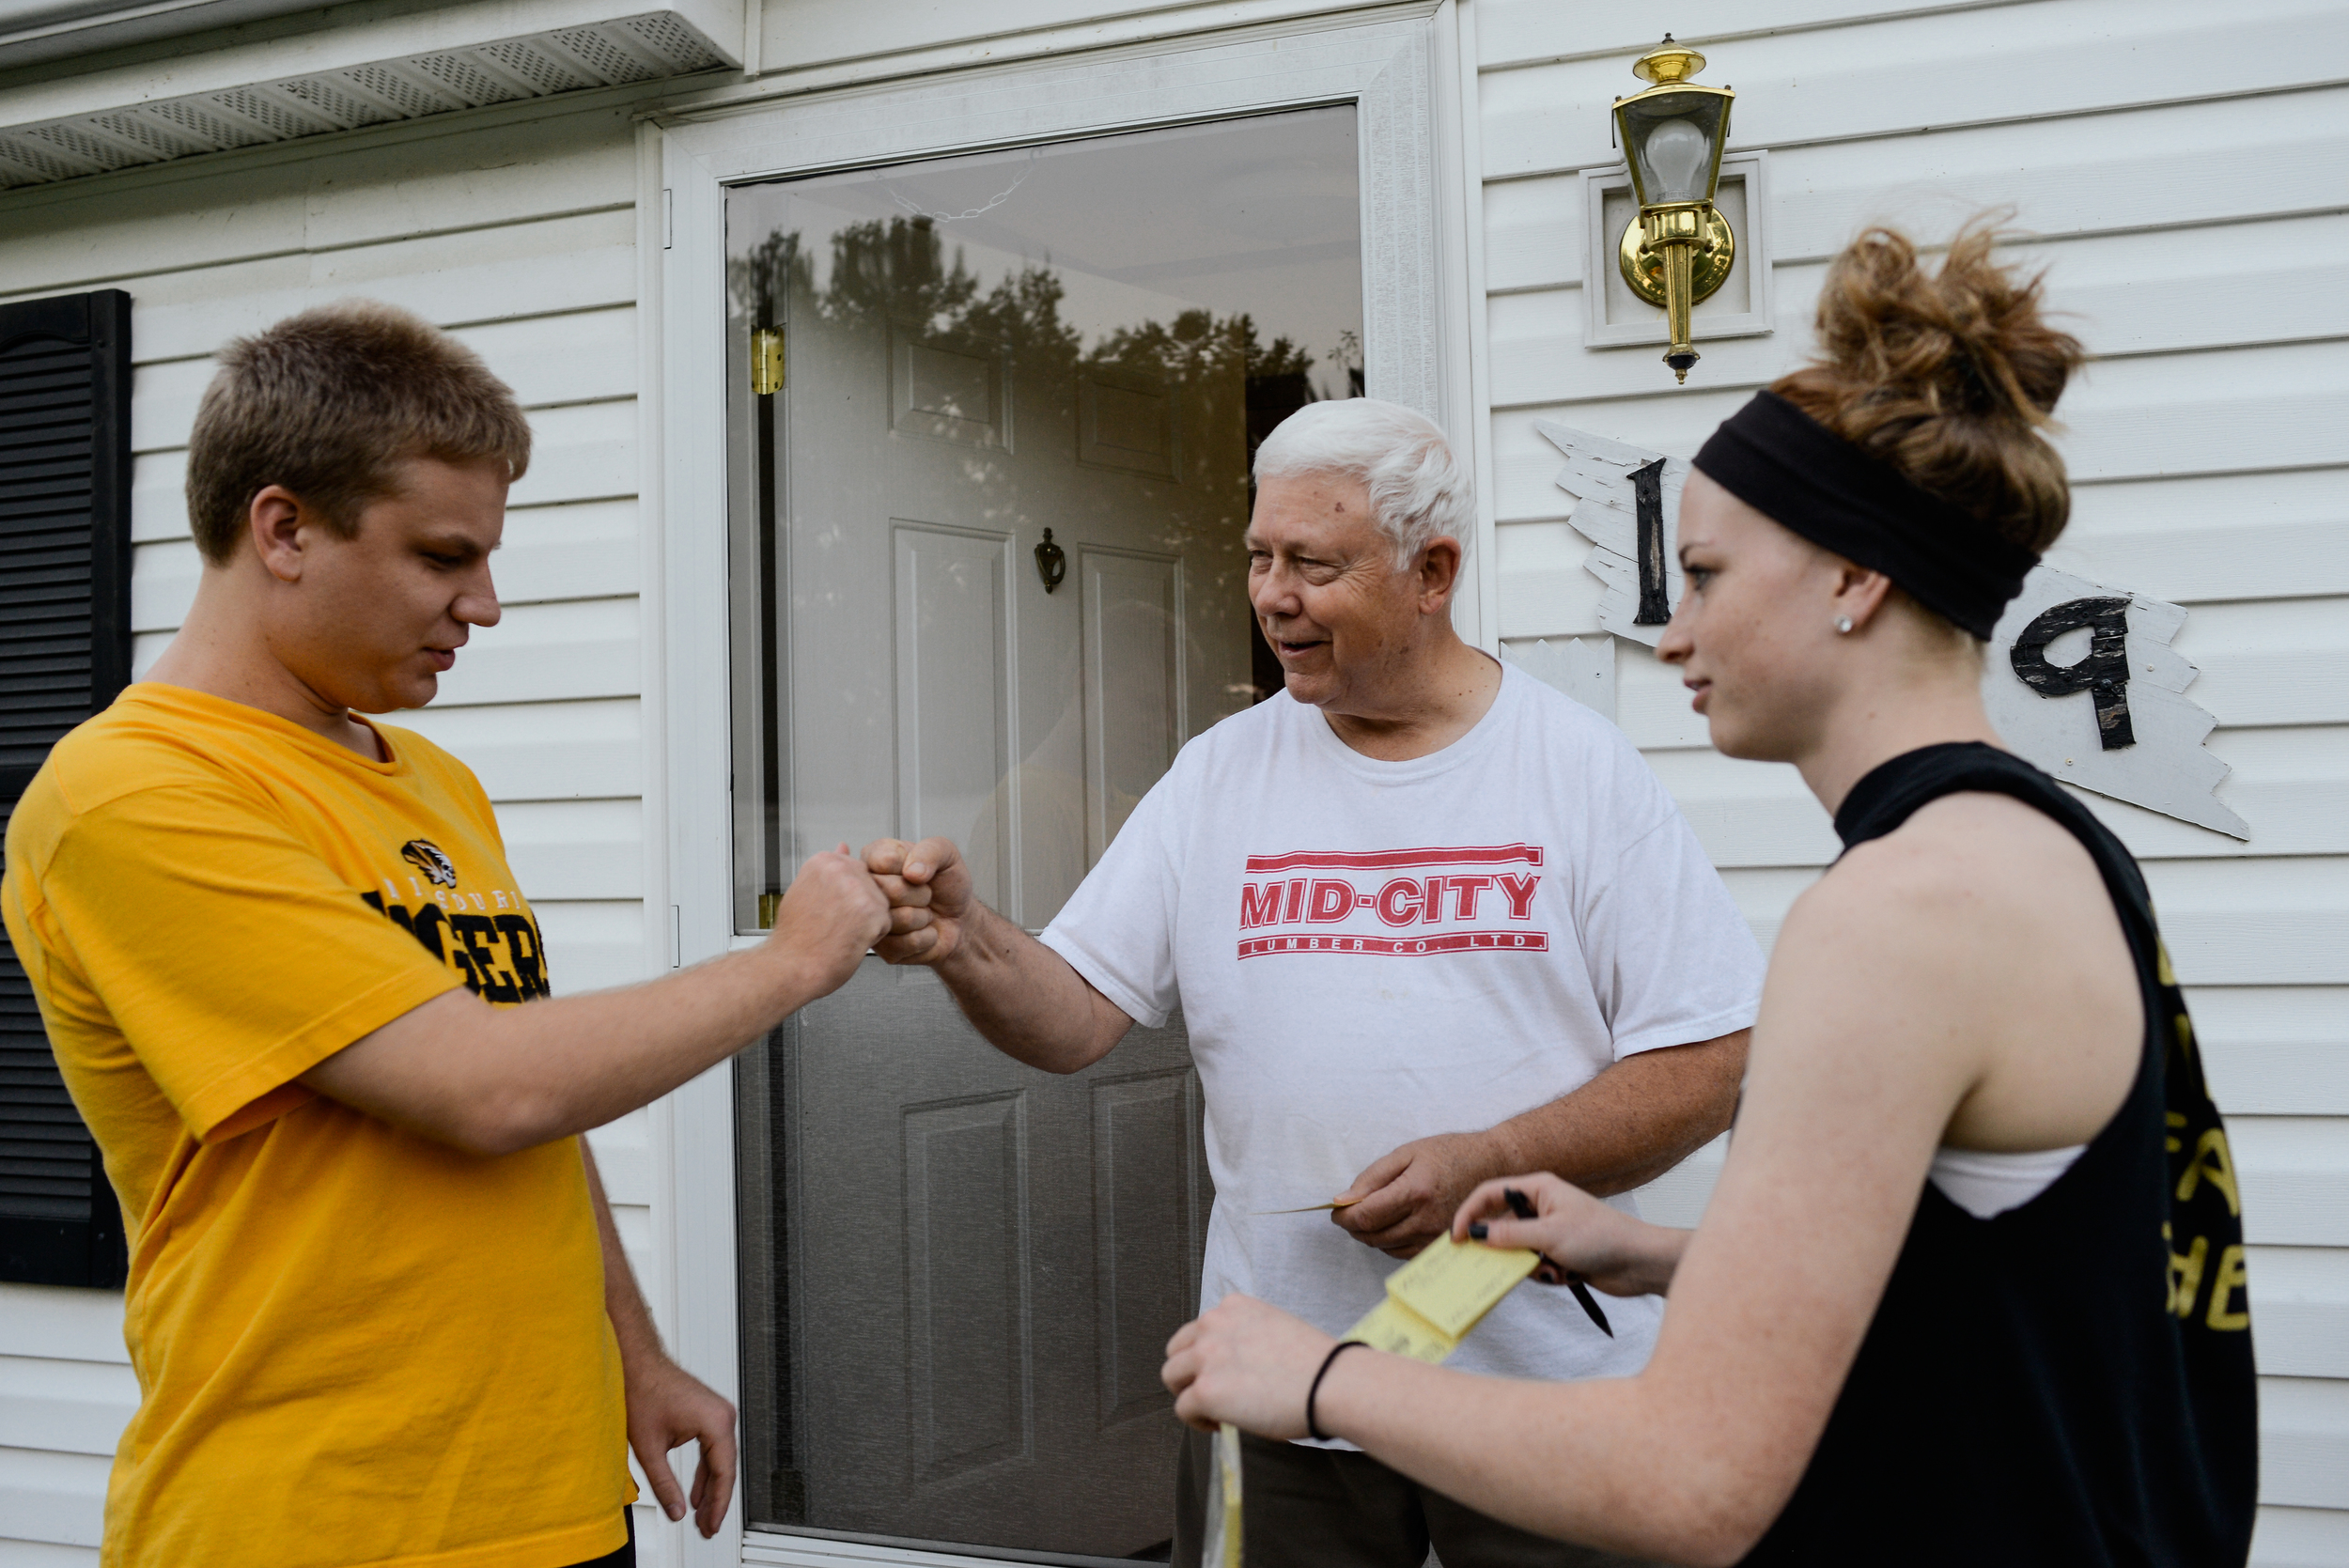  Trenton, Missouri. 2013.  A neighbor greets Dalton and his sister, Angela, as they sell raffle tickets. People in the community enjoy him stopping by. 